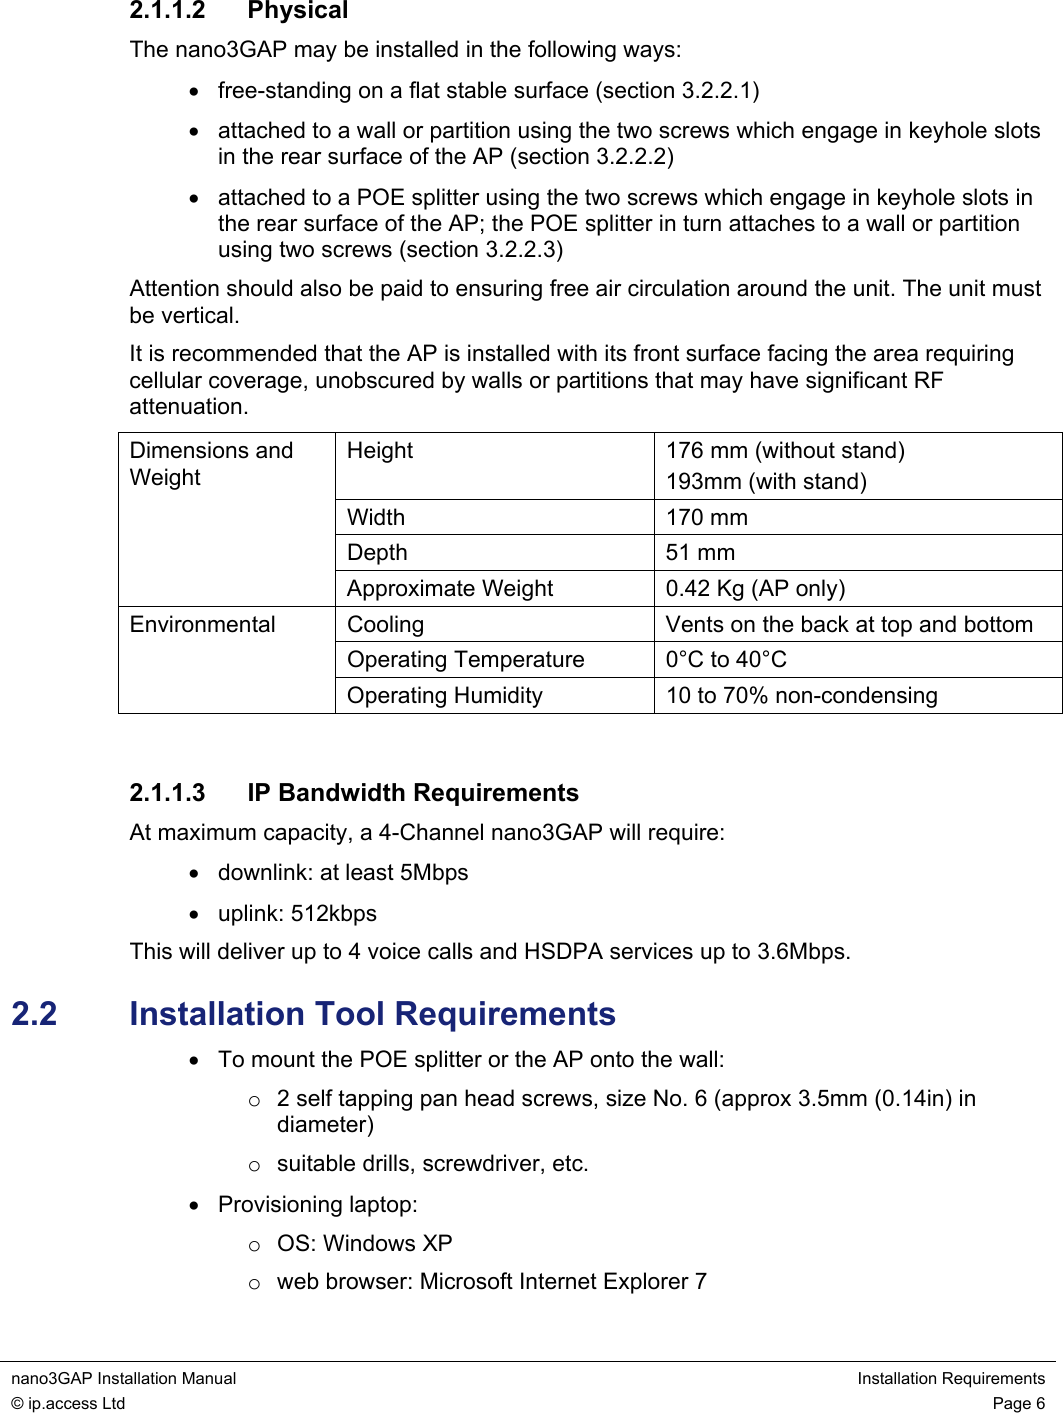  nano3GAP Installation Manual  Installation Requirements © ip.access Ltd  Page 6  2.1.1.2 Physical The nano3GAP may be installed in the following ways: •  free-standing on a flat stable surface (section 3.2.2.1) • attached to a wall or partition using the two screws which engage in keyhole slots in the rear surface of the AP (section 3.2.2.2) • attached to a POE splitter using the two screws which engage in keyhole slots in the rear surface of the AP; the POE splitter in turn attaches to a wall or partition using two screws (section 3.2.2.3) Attention should also be paid to ensuring free air circulation around the unit. The unit must be vertical. It is recommended that the AP is installed with its front surface facing the area requiring cellular coverage, unobscured by walls or partitions that may have significant RF attenuation. Height  176 mm (without stand) 193mm (with stand) Width 170 mm Depth 51 mm Dimensions and Weight Approximate Weight  0.42 Kg (AP only) Cooling  Vents on the back at top and bottom Operating Temperature  0°C to 40°C Environmental Operating Humidity  10 to 70% non-condensing  2.1.1.3  IP Bandwidth Requirements At maximum capacity, a 4-Channel nano3GAP will require: •  downlink: at least 5Mbps • uplink: 512kbps This will deliver up to 4 voice calls and HSDPA services up to 3.6Mbps. 2.2  Installation Tool Requirements •  To mount the POE splitter or the AP onto the wall: o  2 self tapping pan head screws, size No. 6 (approx 3.5mm (0.14in) in diameter) o  suitable drills, screwdriver, etc. • Provisioning laptop: o  OS: Windows XP o  web browser: Microsoft Internet Explorer 7 